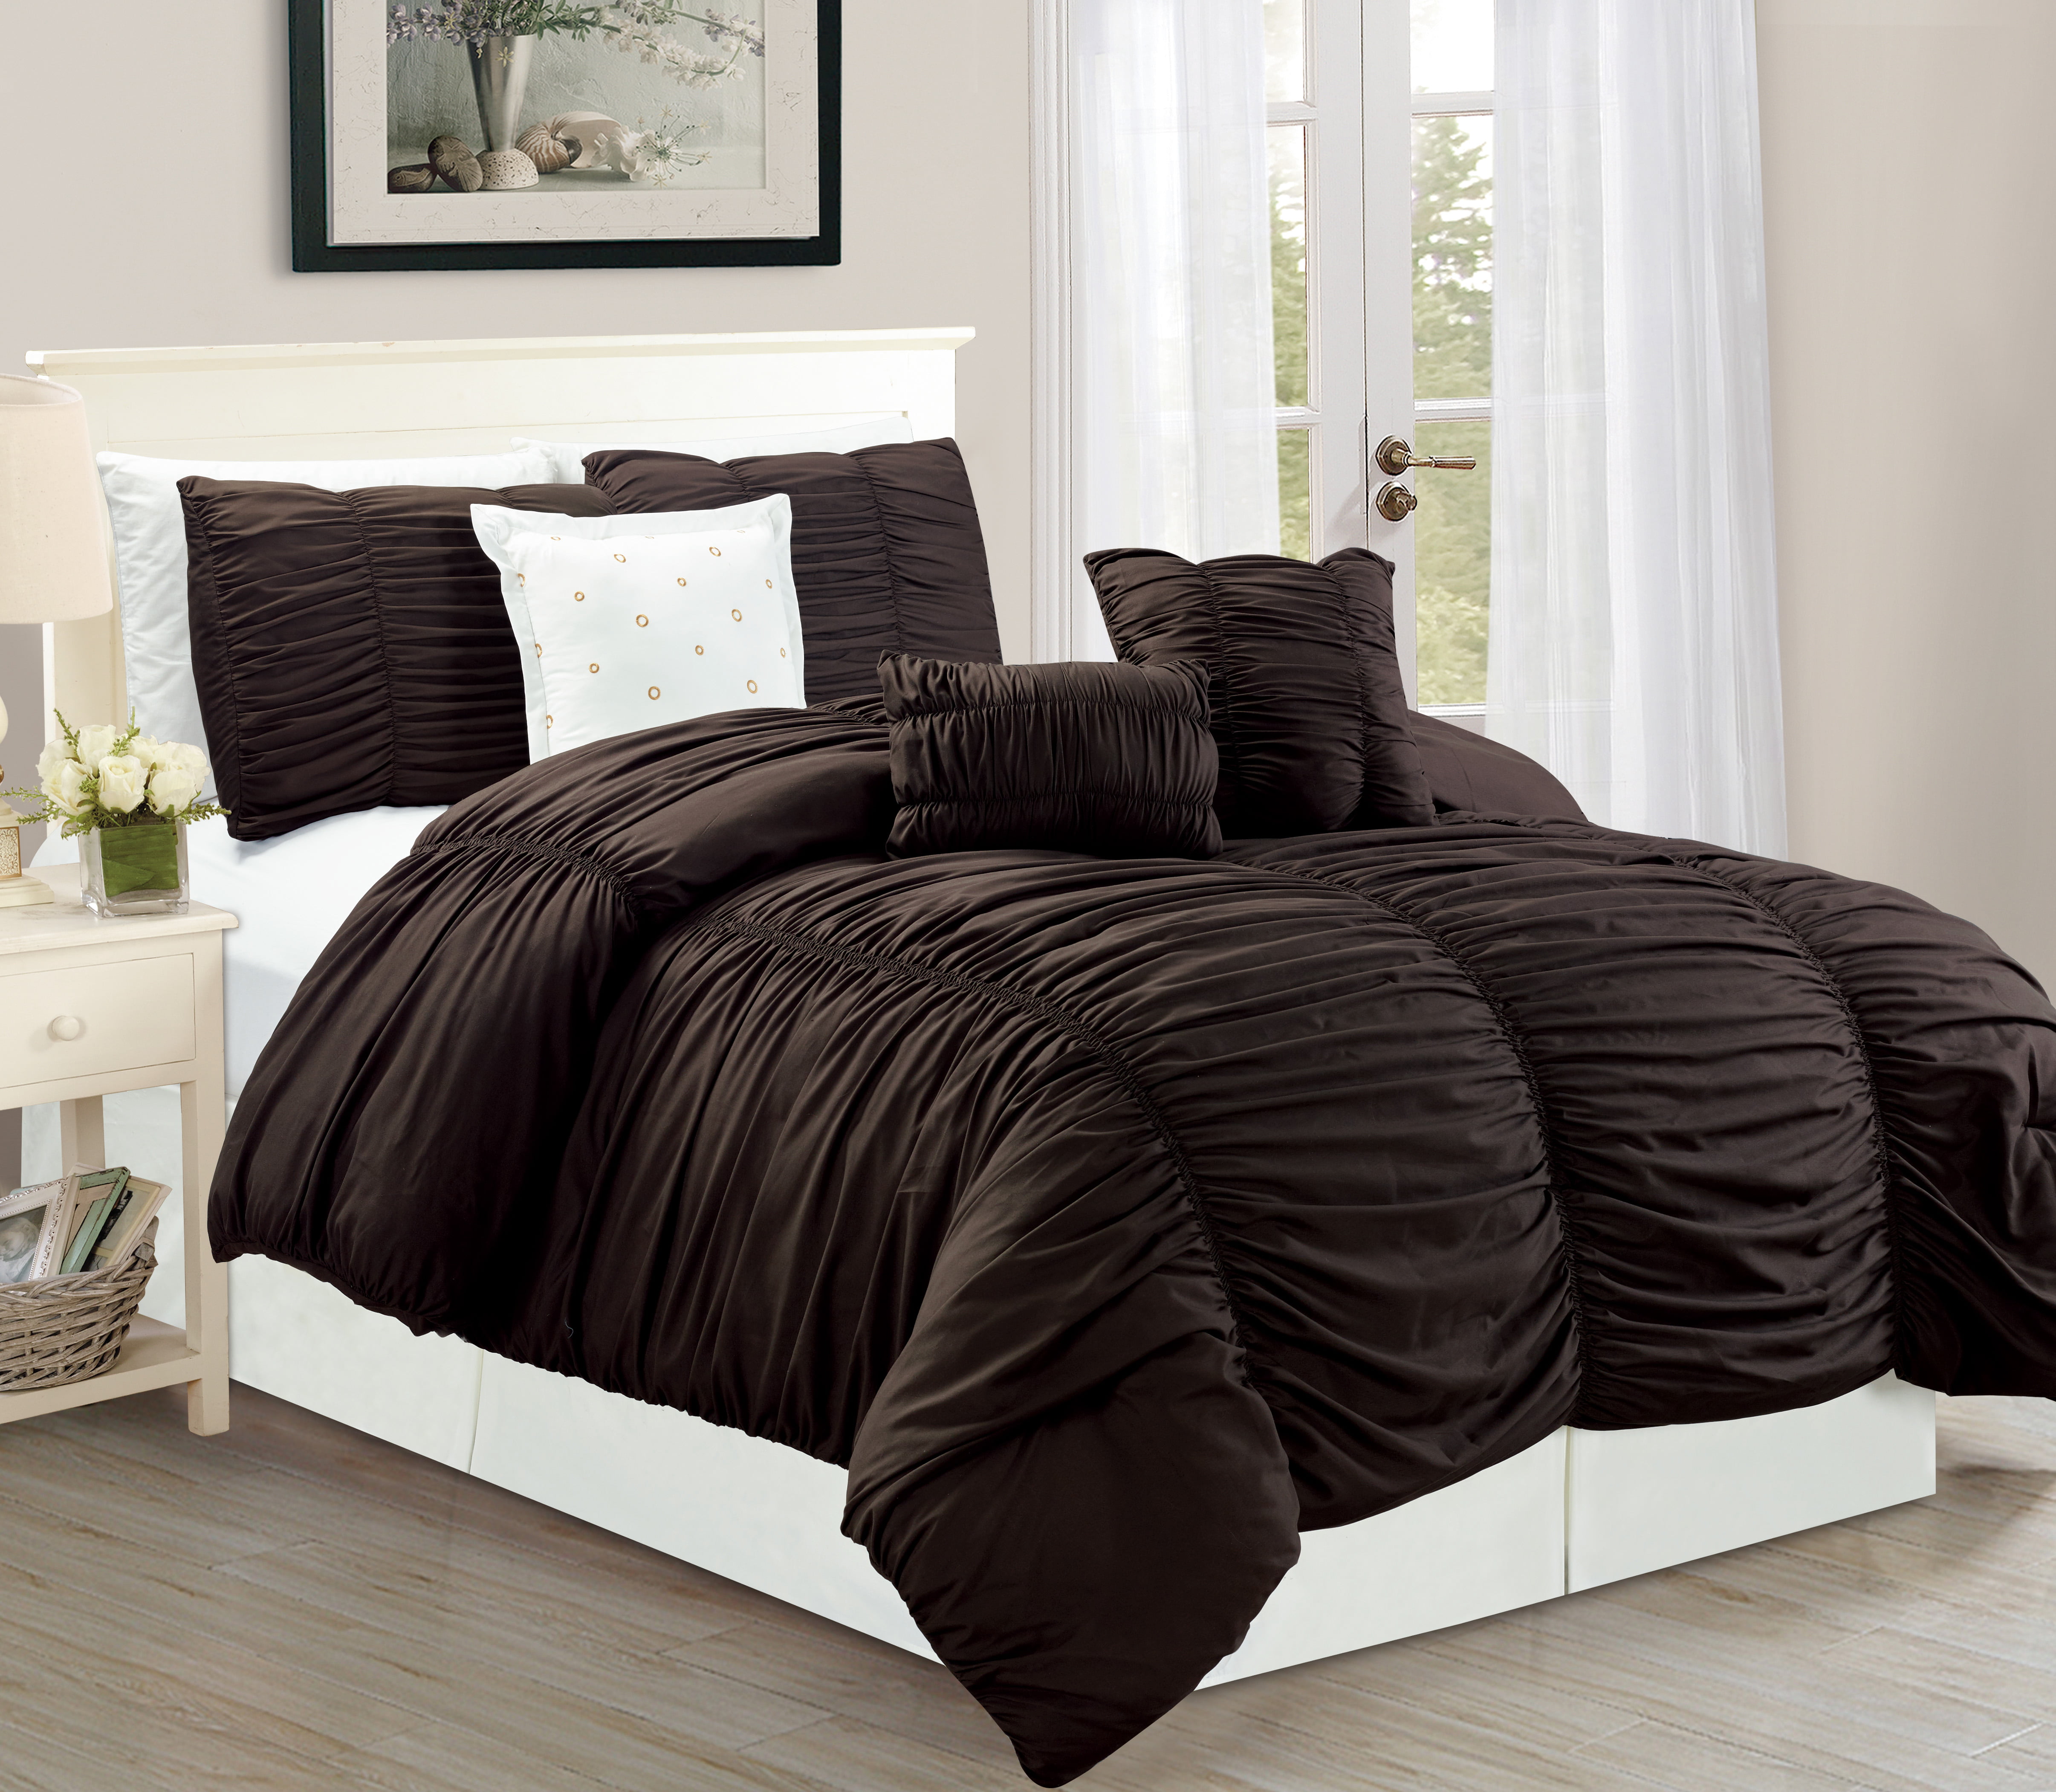 brown and teal twin comforter